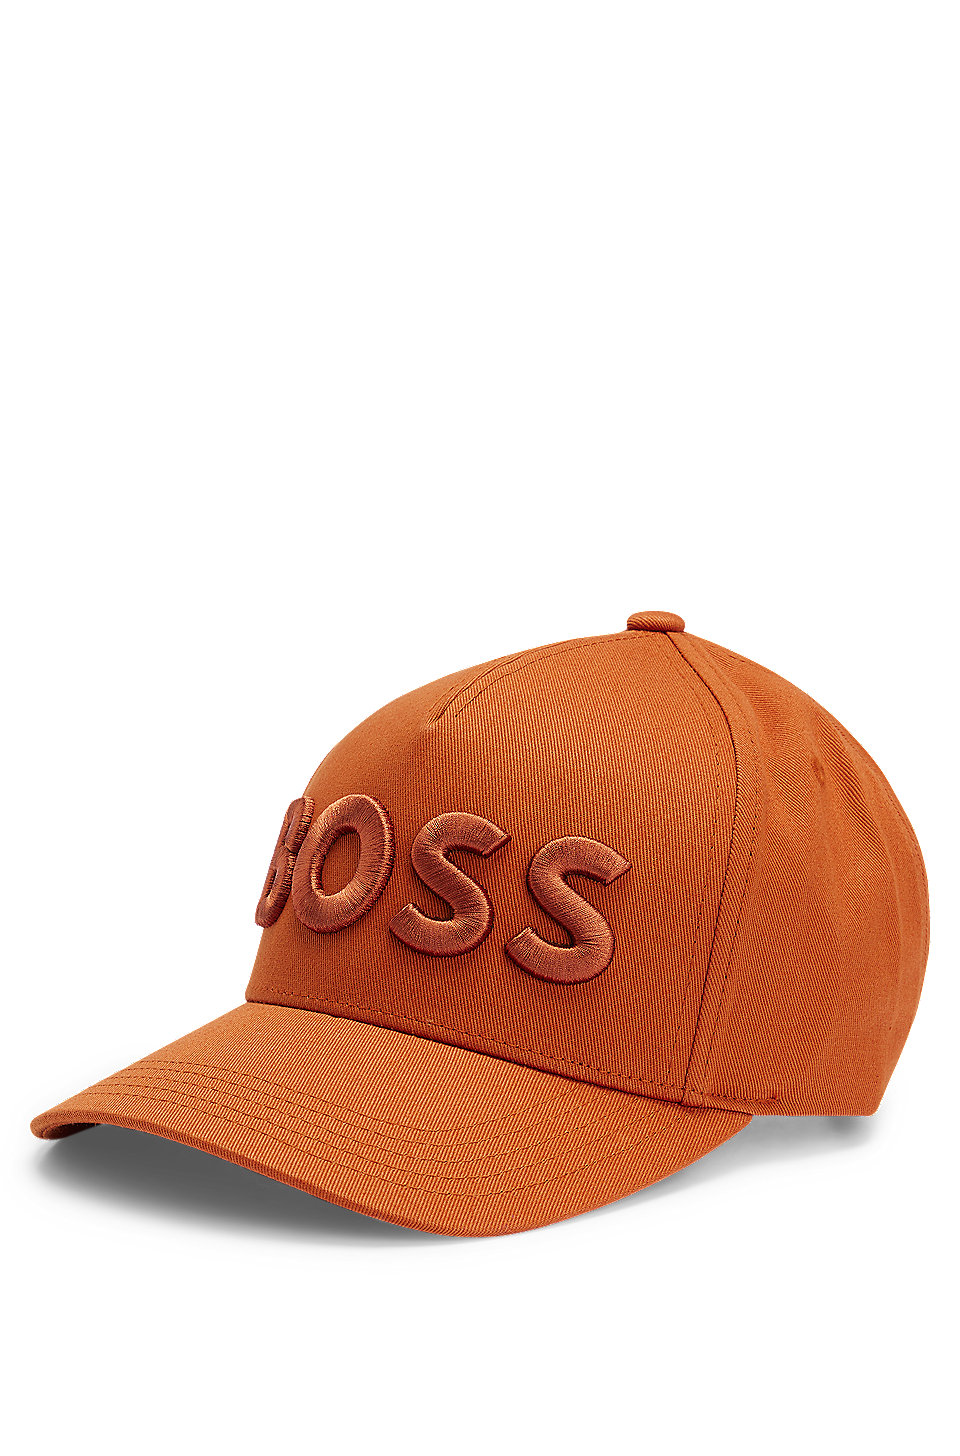 Cotton-twill and with embroidered - BOSS logo strap adjustable cap